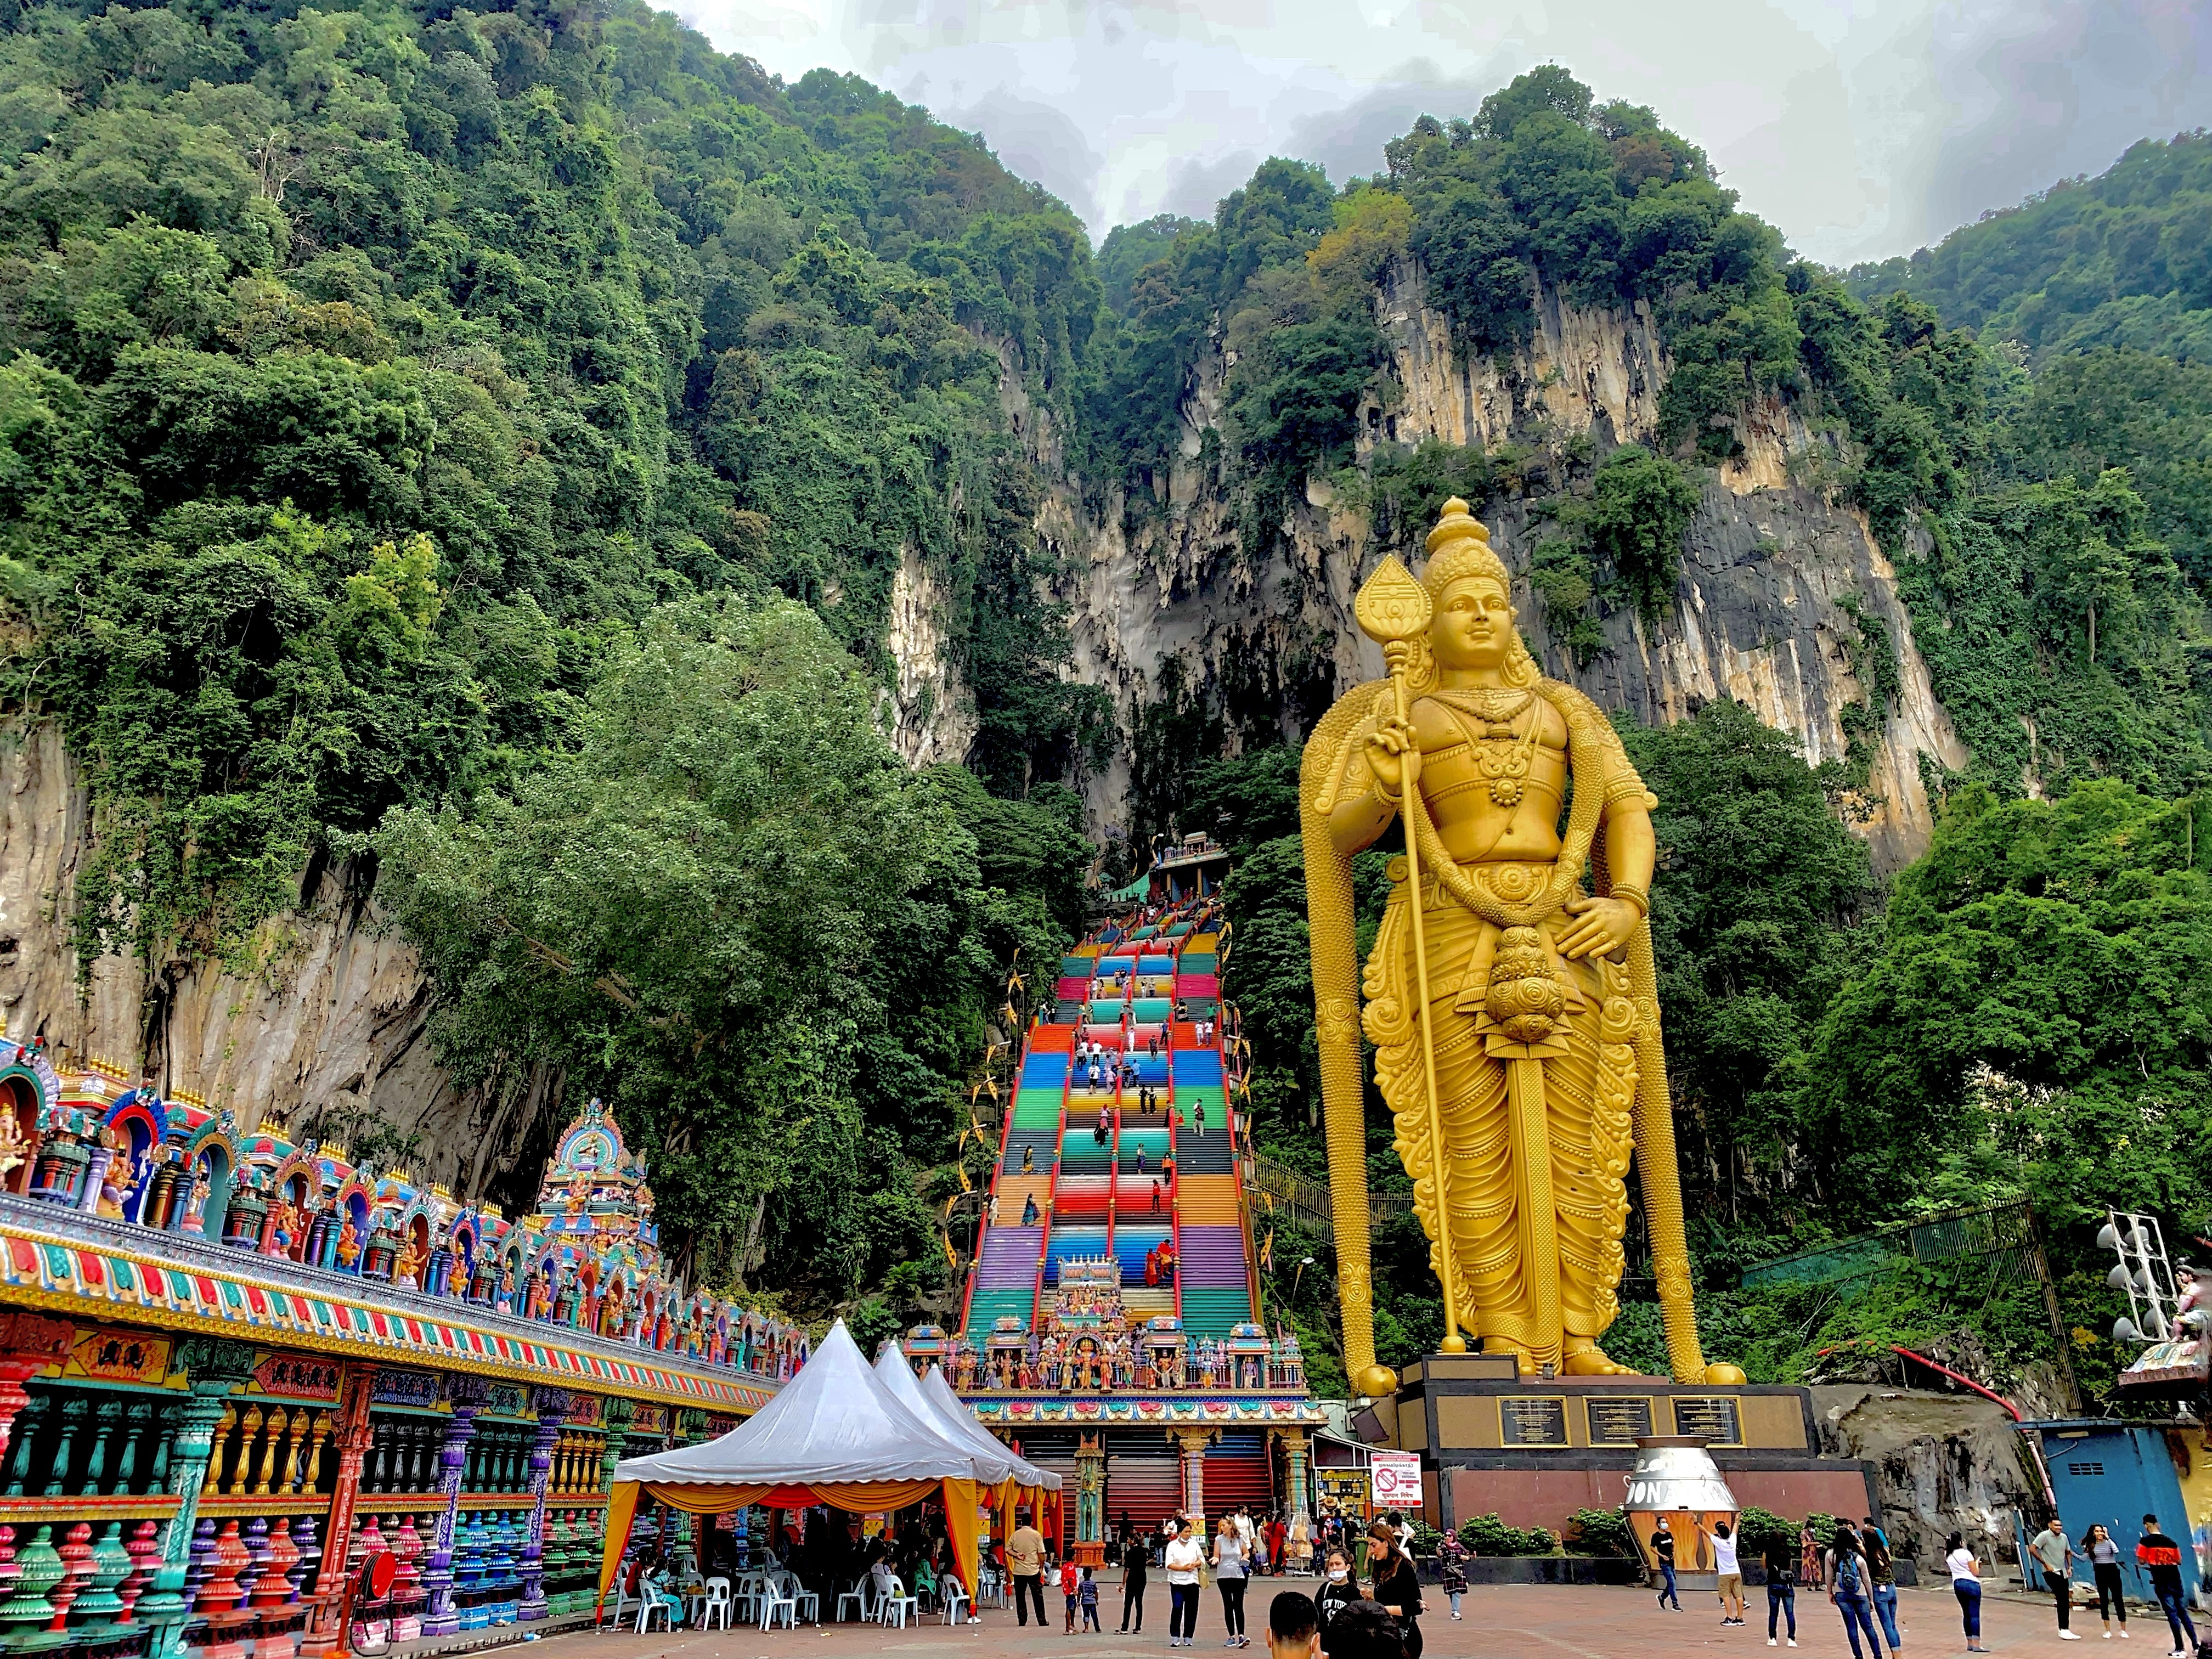 Batu Caves, one of Malaysia's tourist attractions